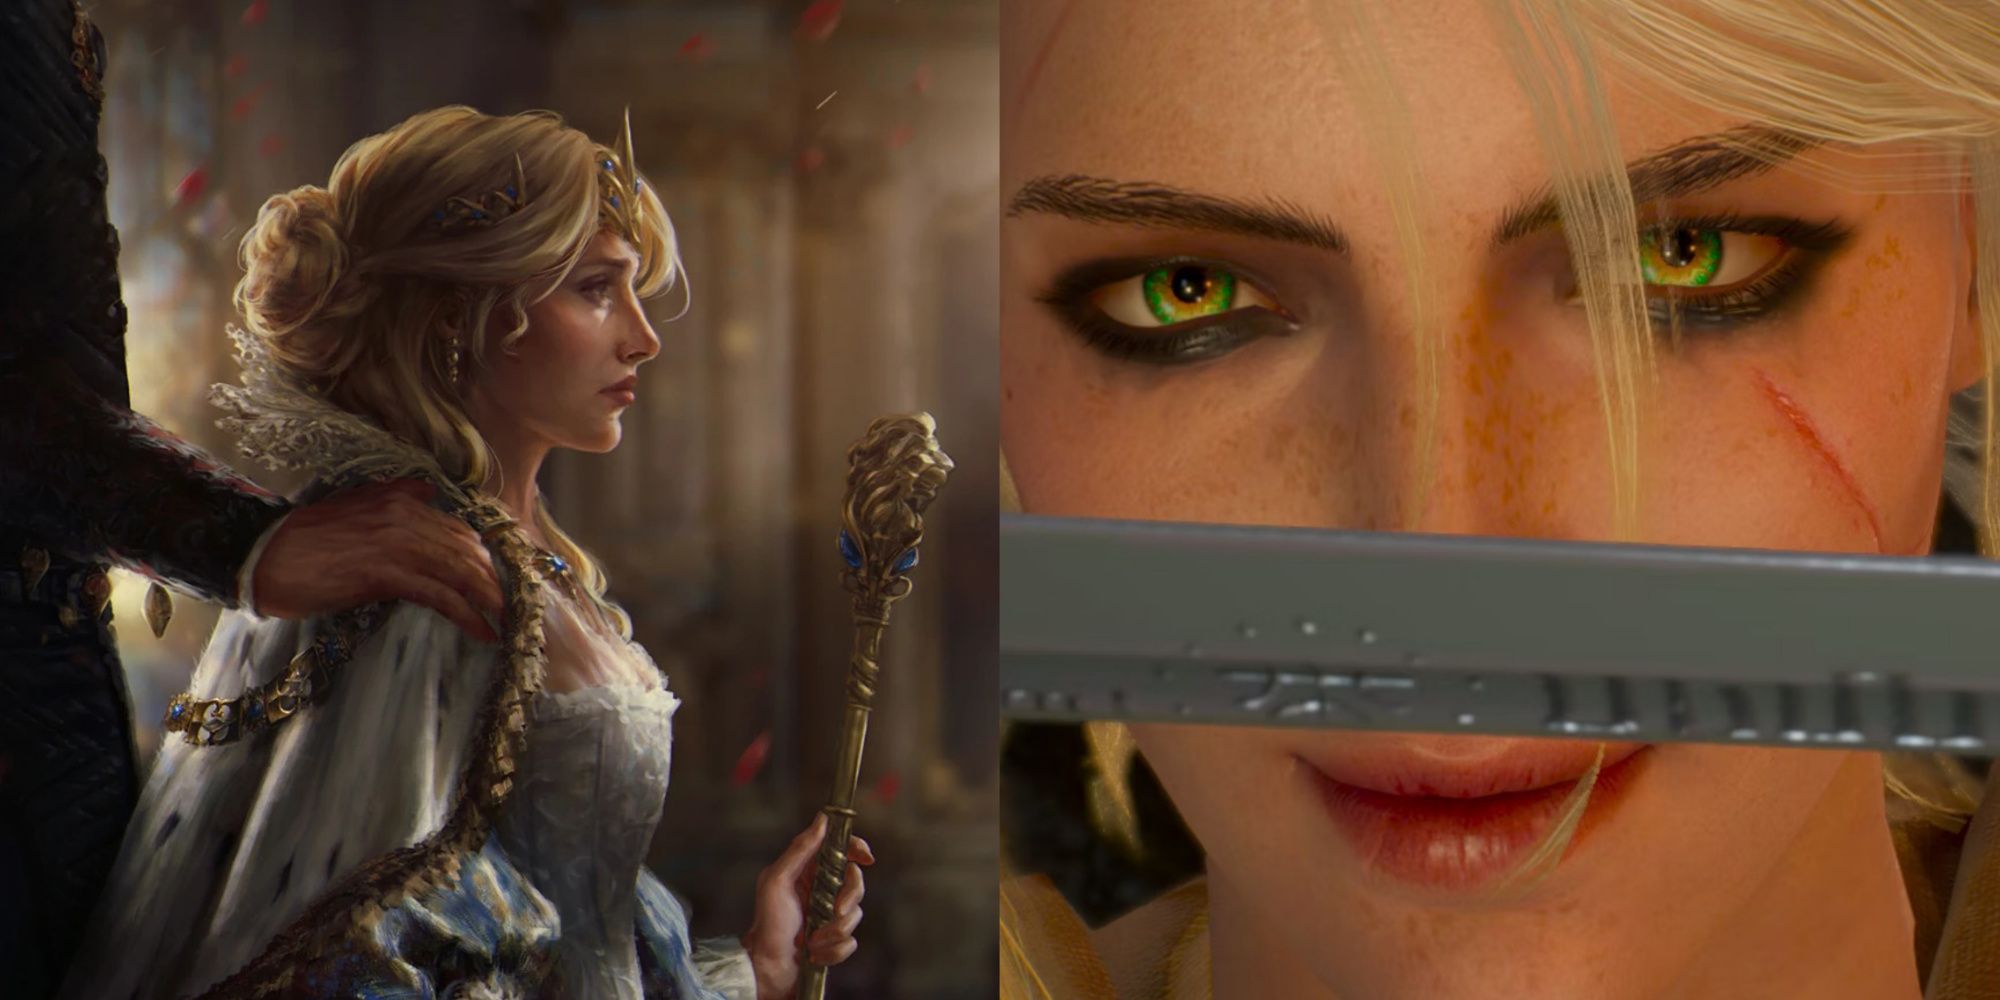 The witcher 3, Ciri as empress and ciri holding her new sword in the witcher ending